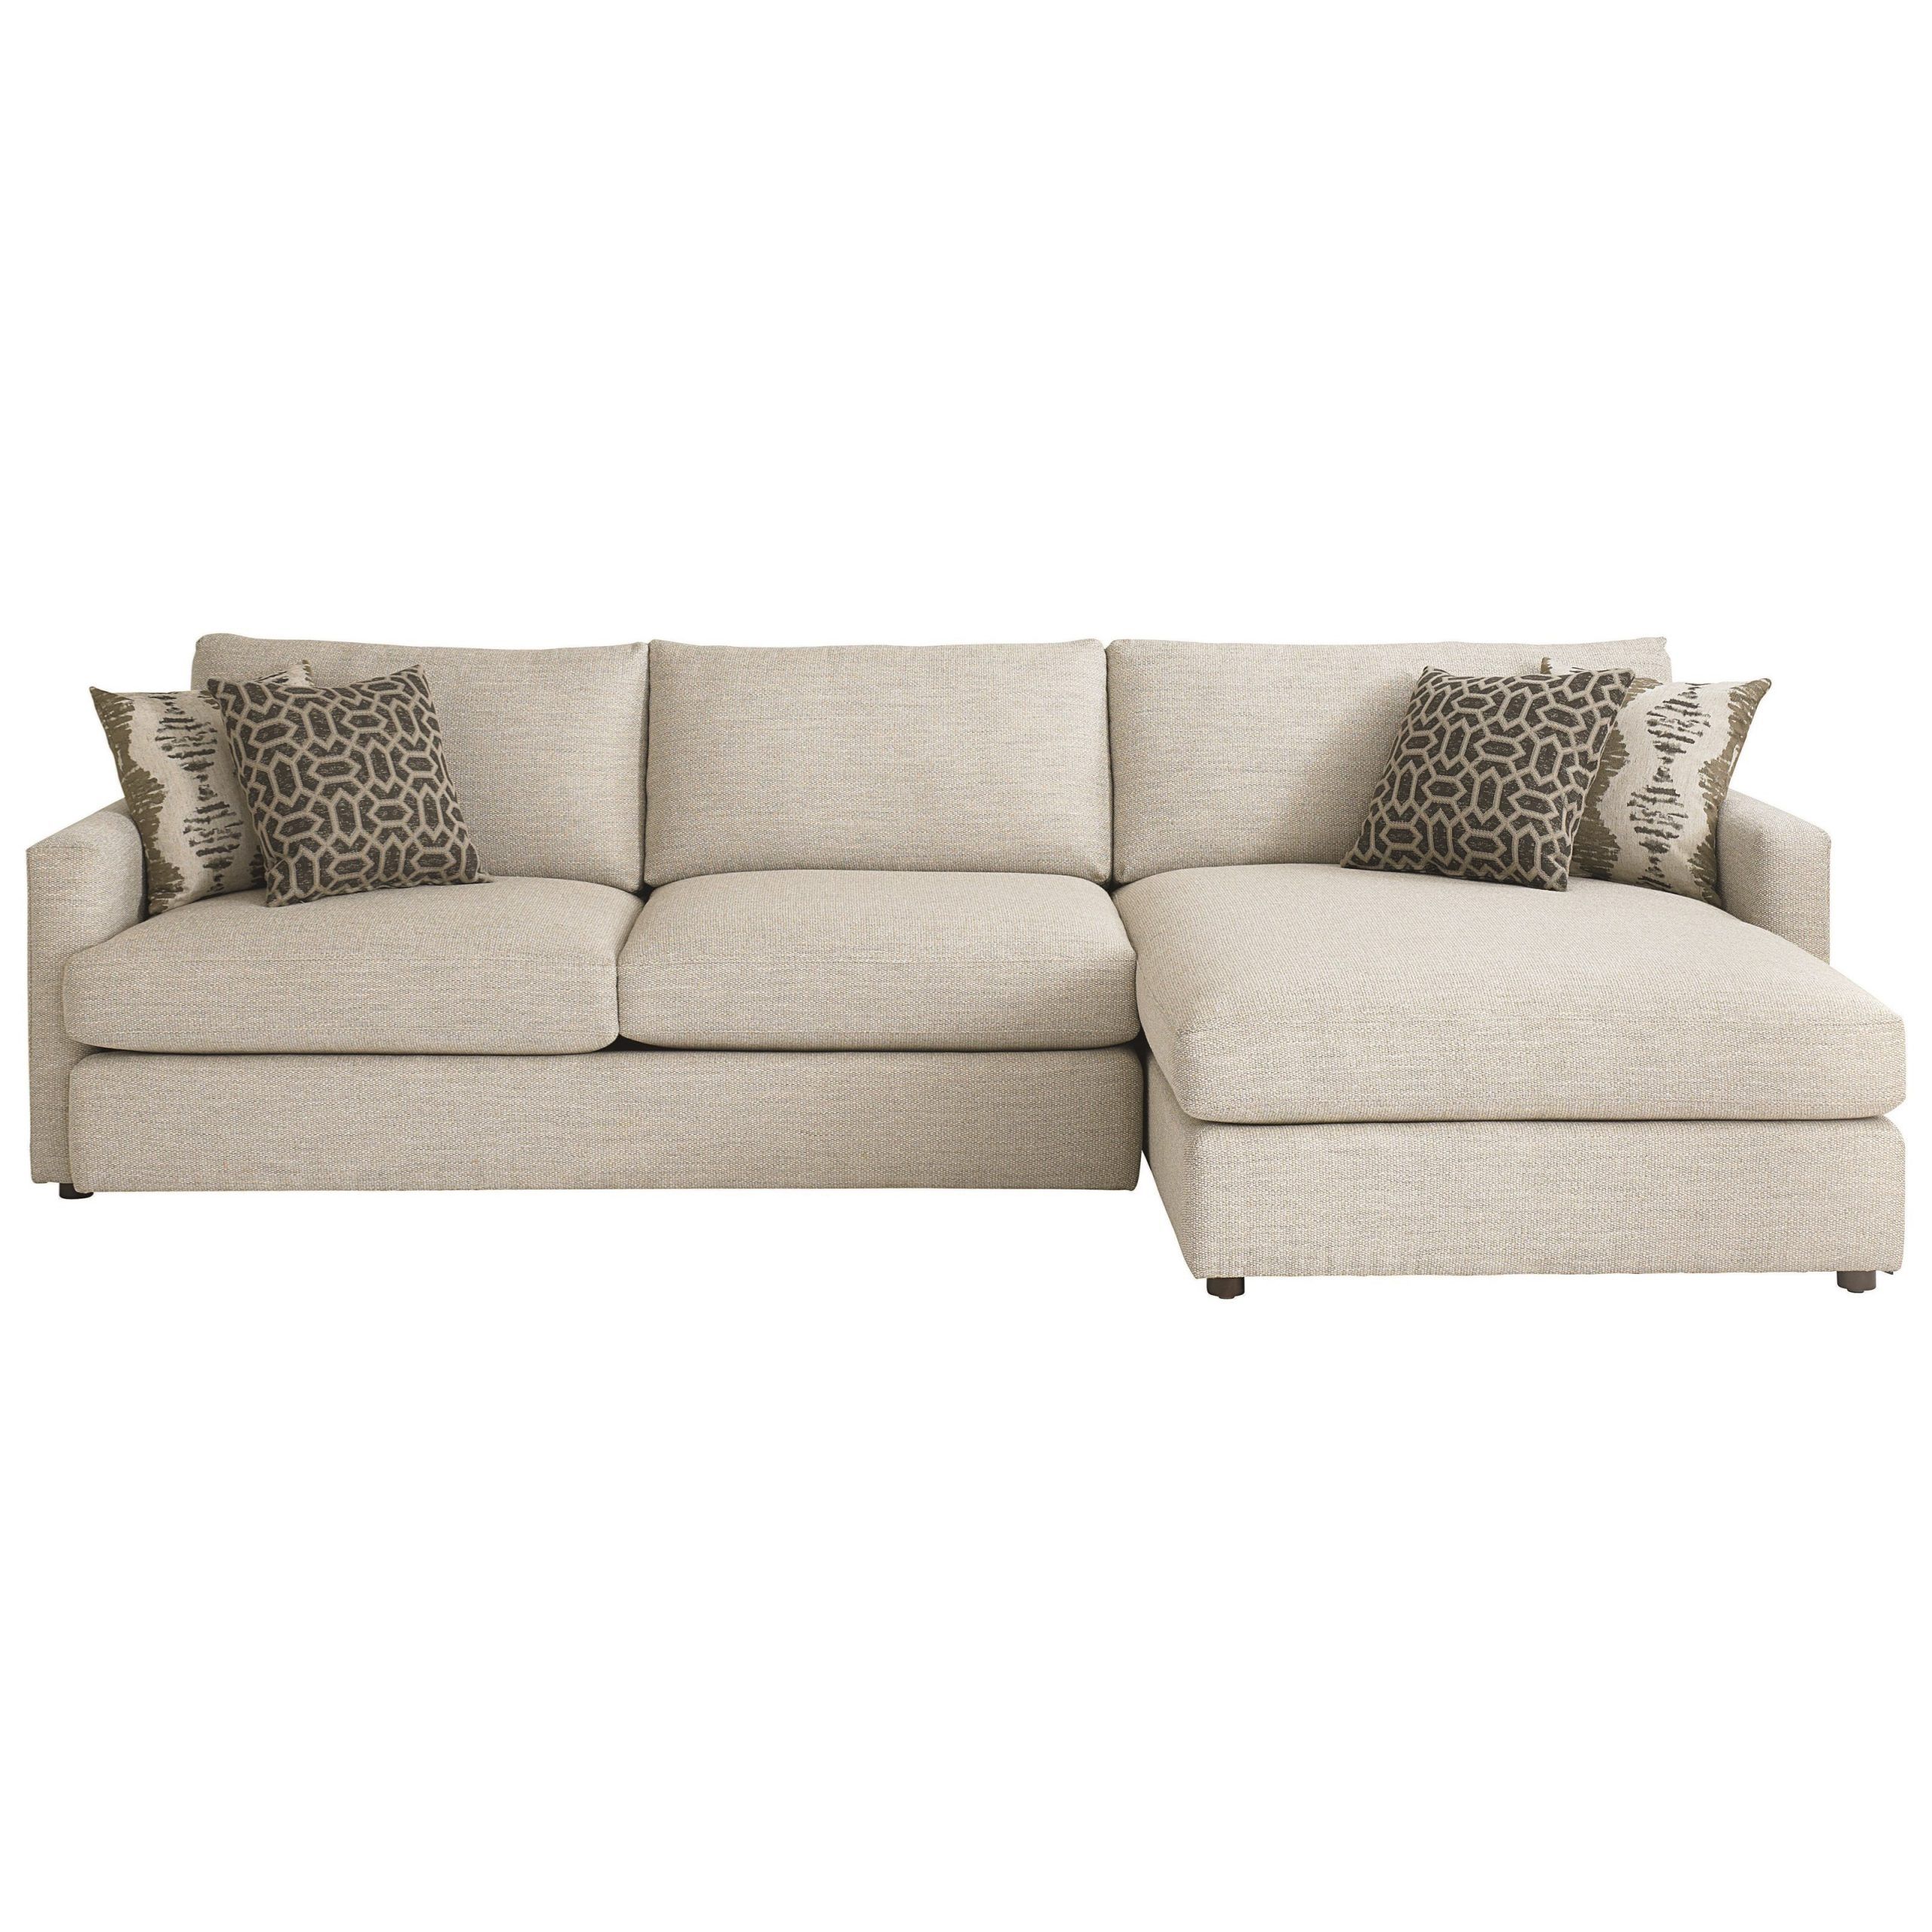 Widely Used Hannah Left Sectional Sofas Within Bassett Allure Contemporary Sectional With Left Arm Facing (View 12 of 25)